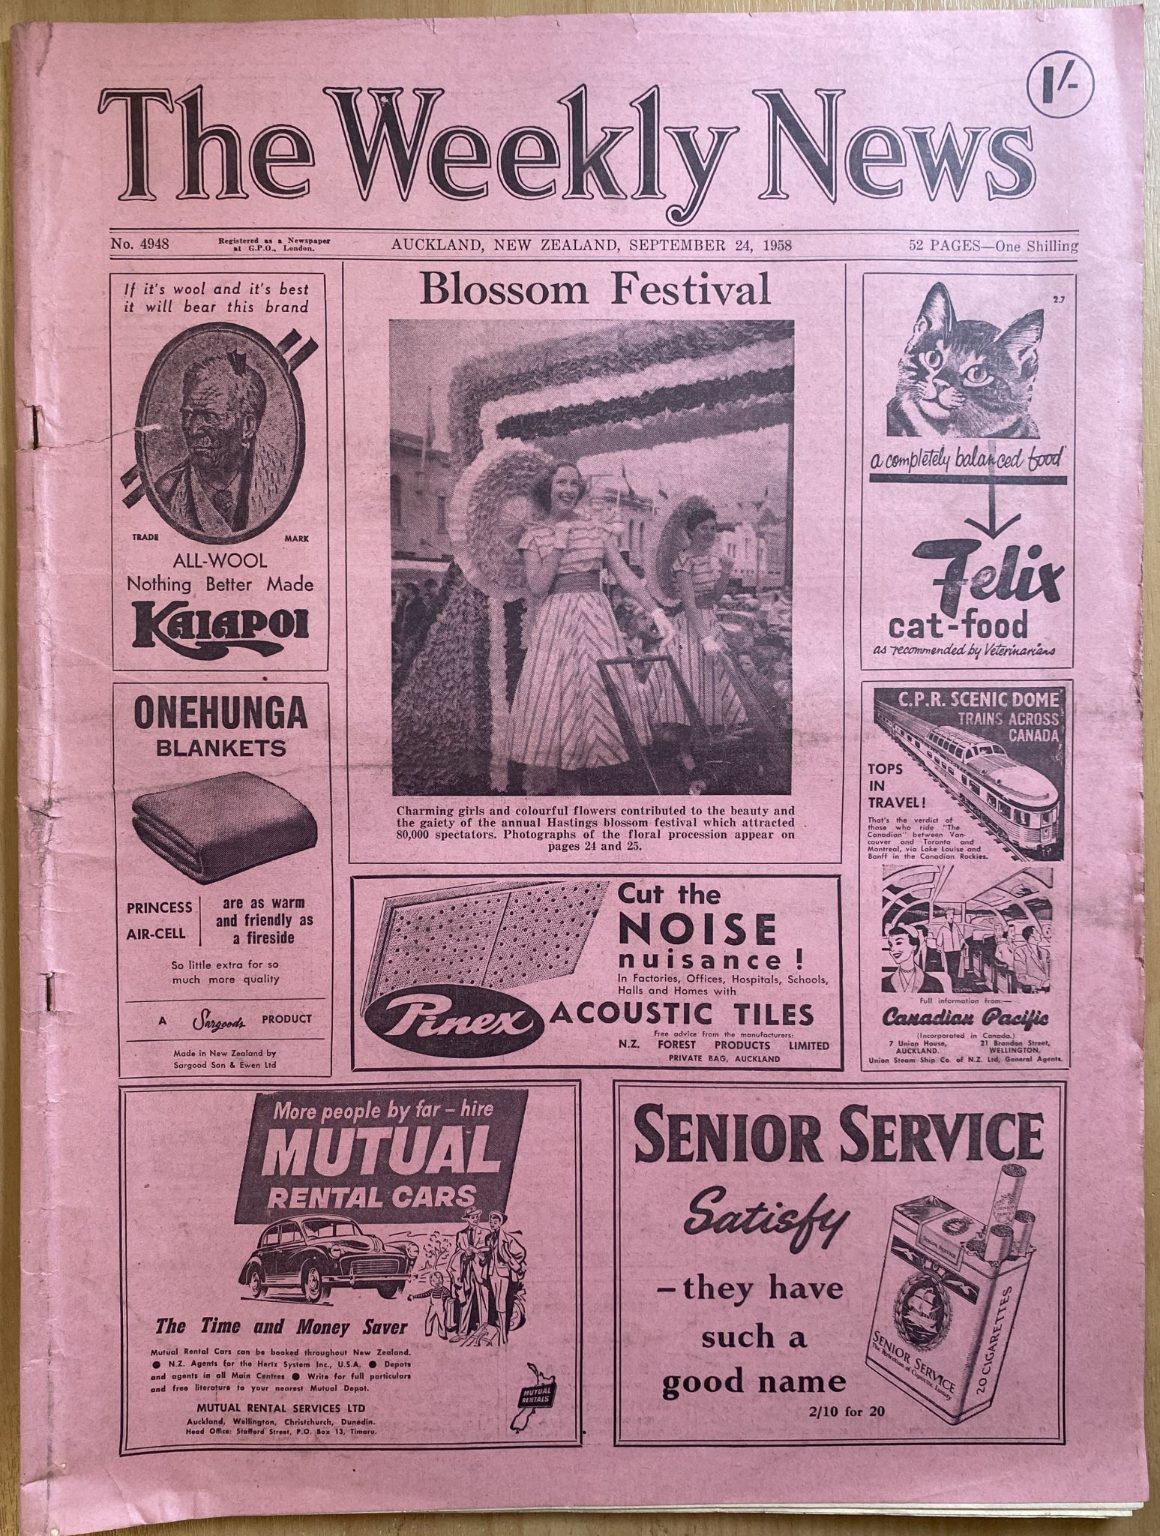 OLD NEWSPAPER: The Weekly News, No. 4948, 24 September 1958